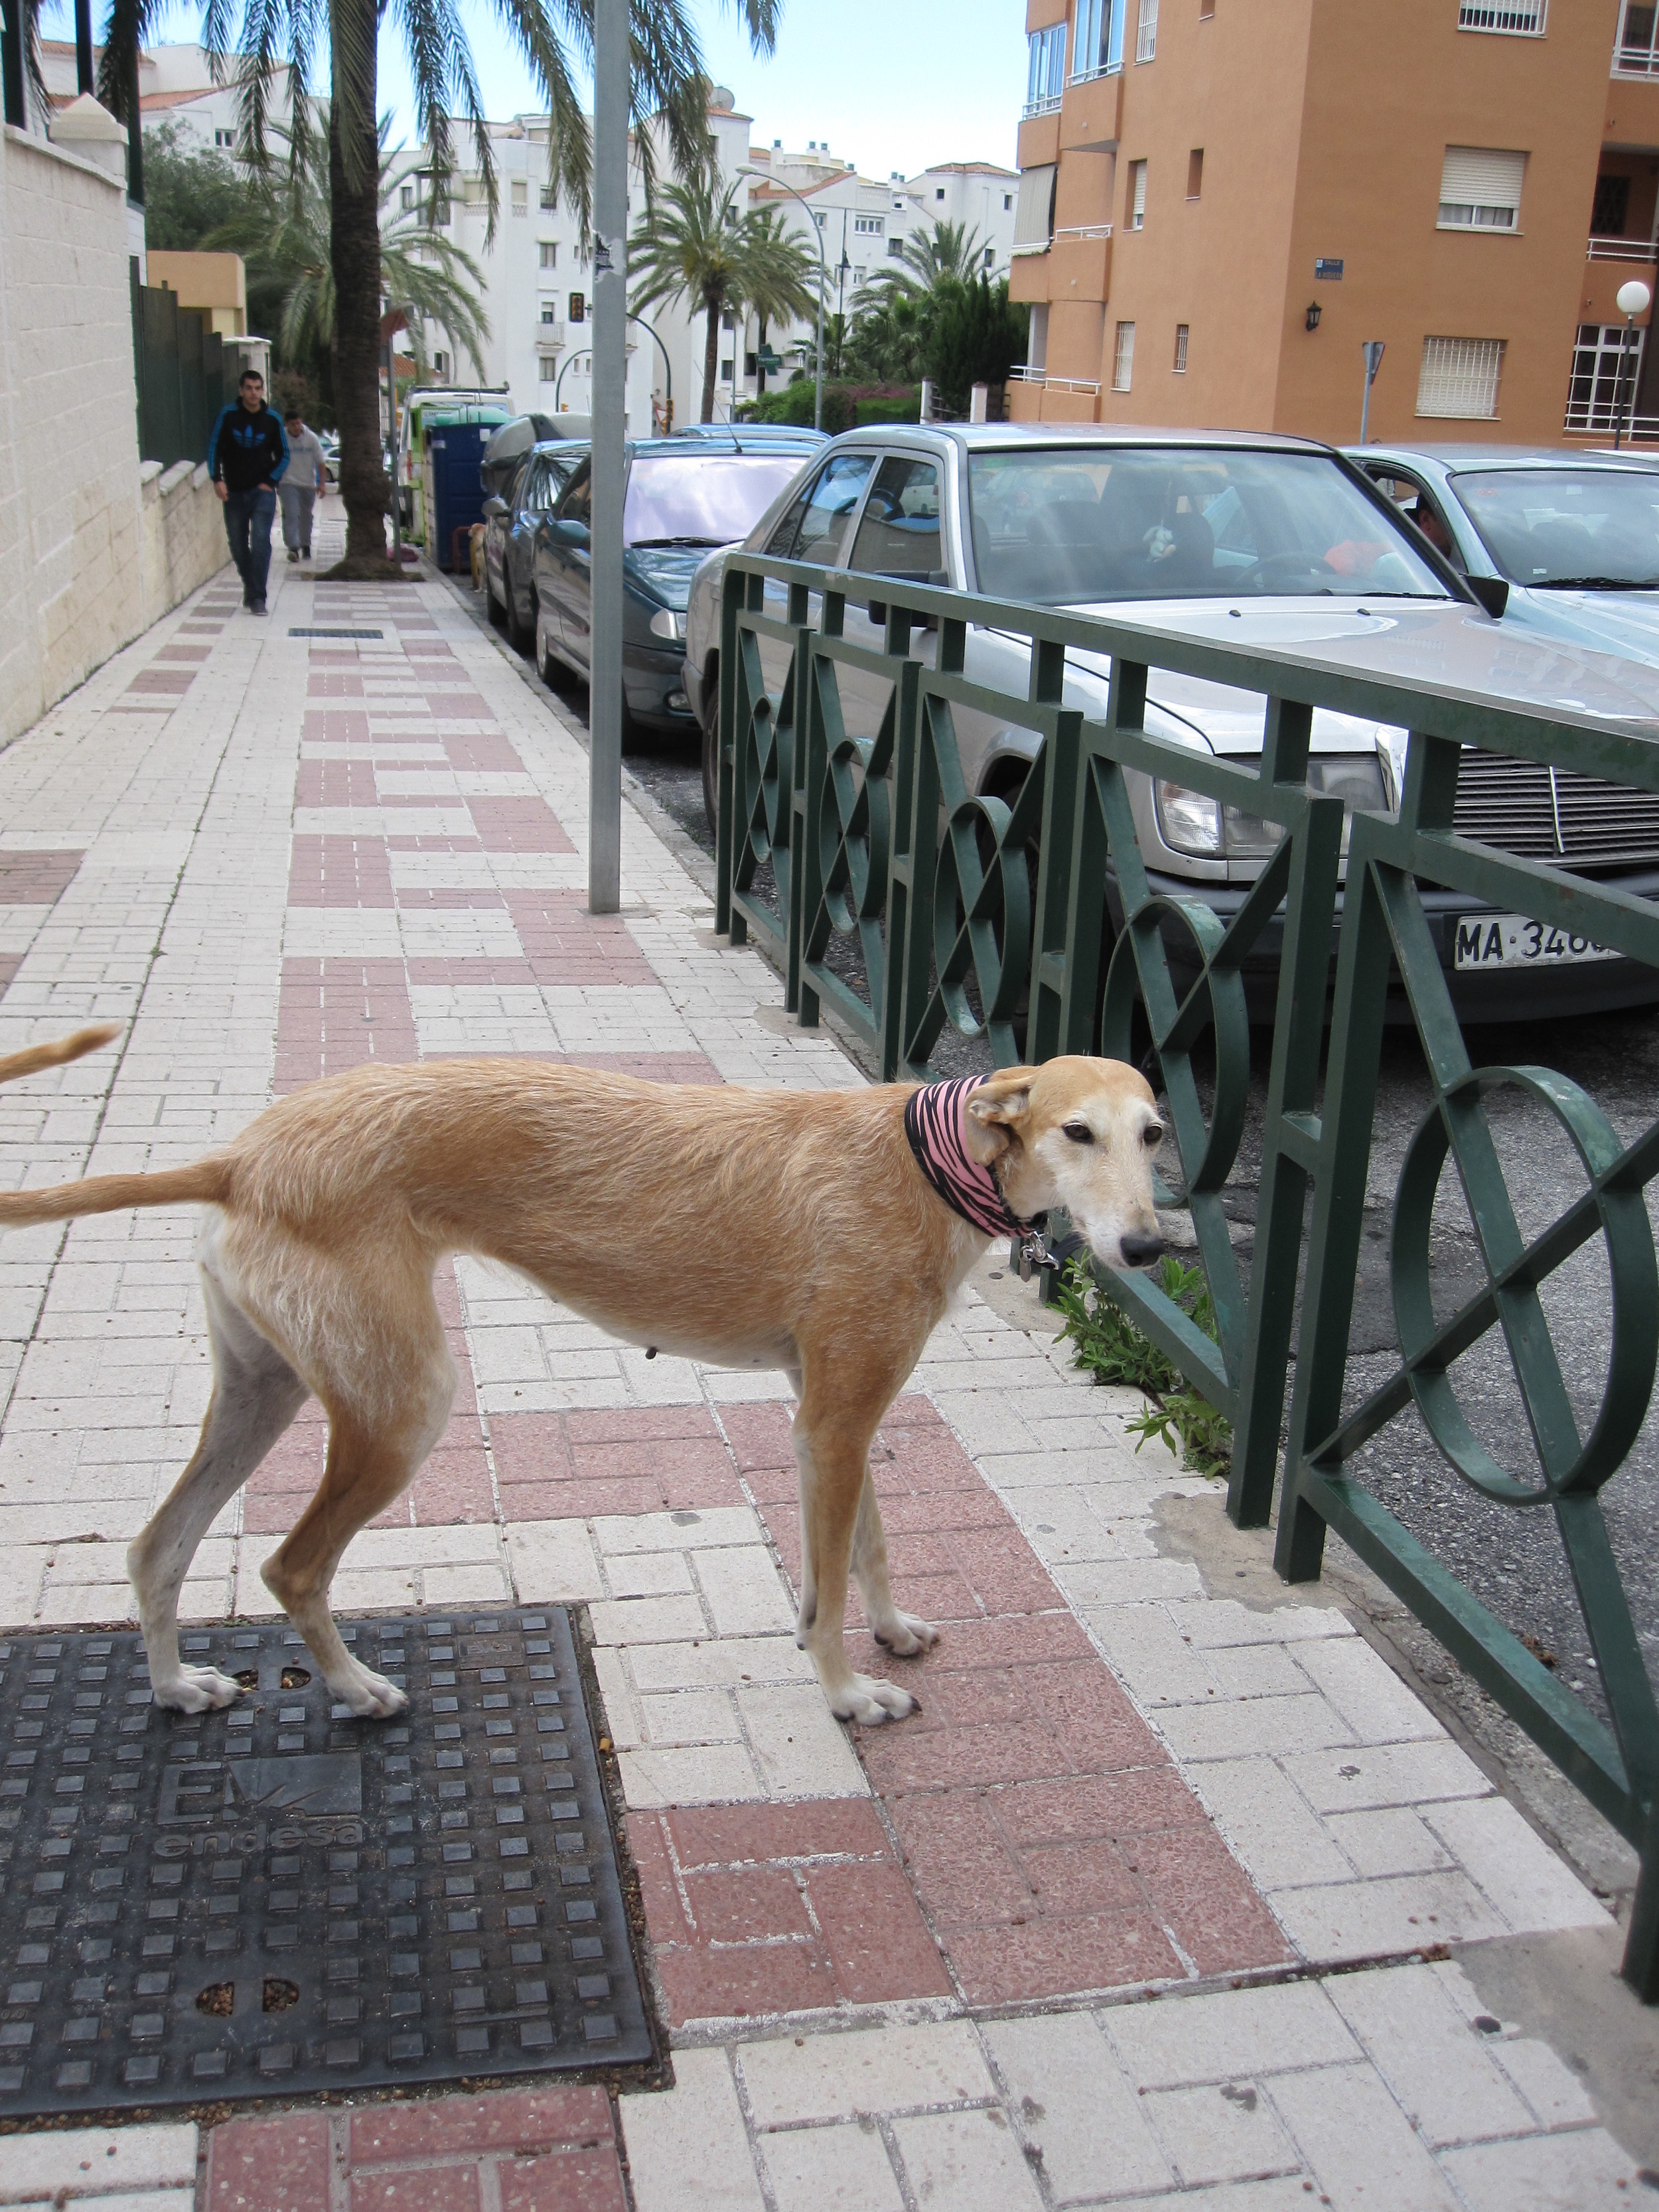 A galgo left tied to a rail waiting for owner...my heart skipped a beat.